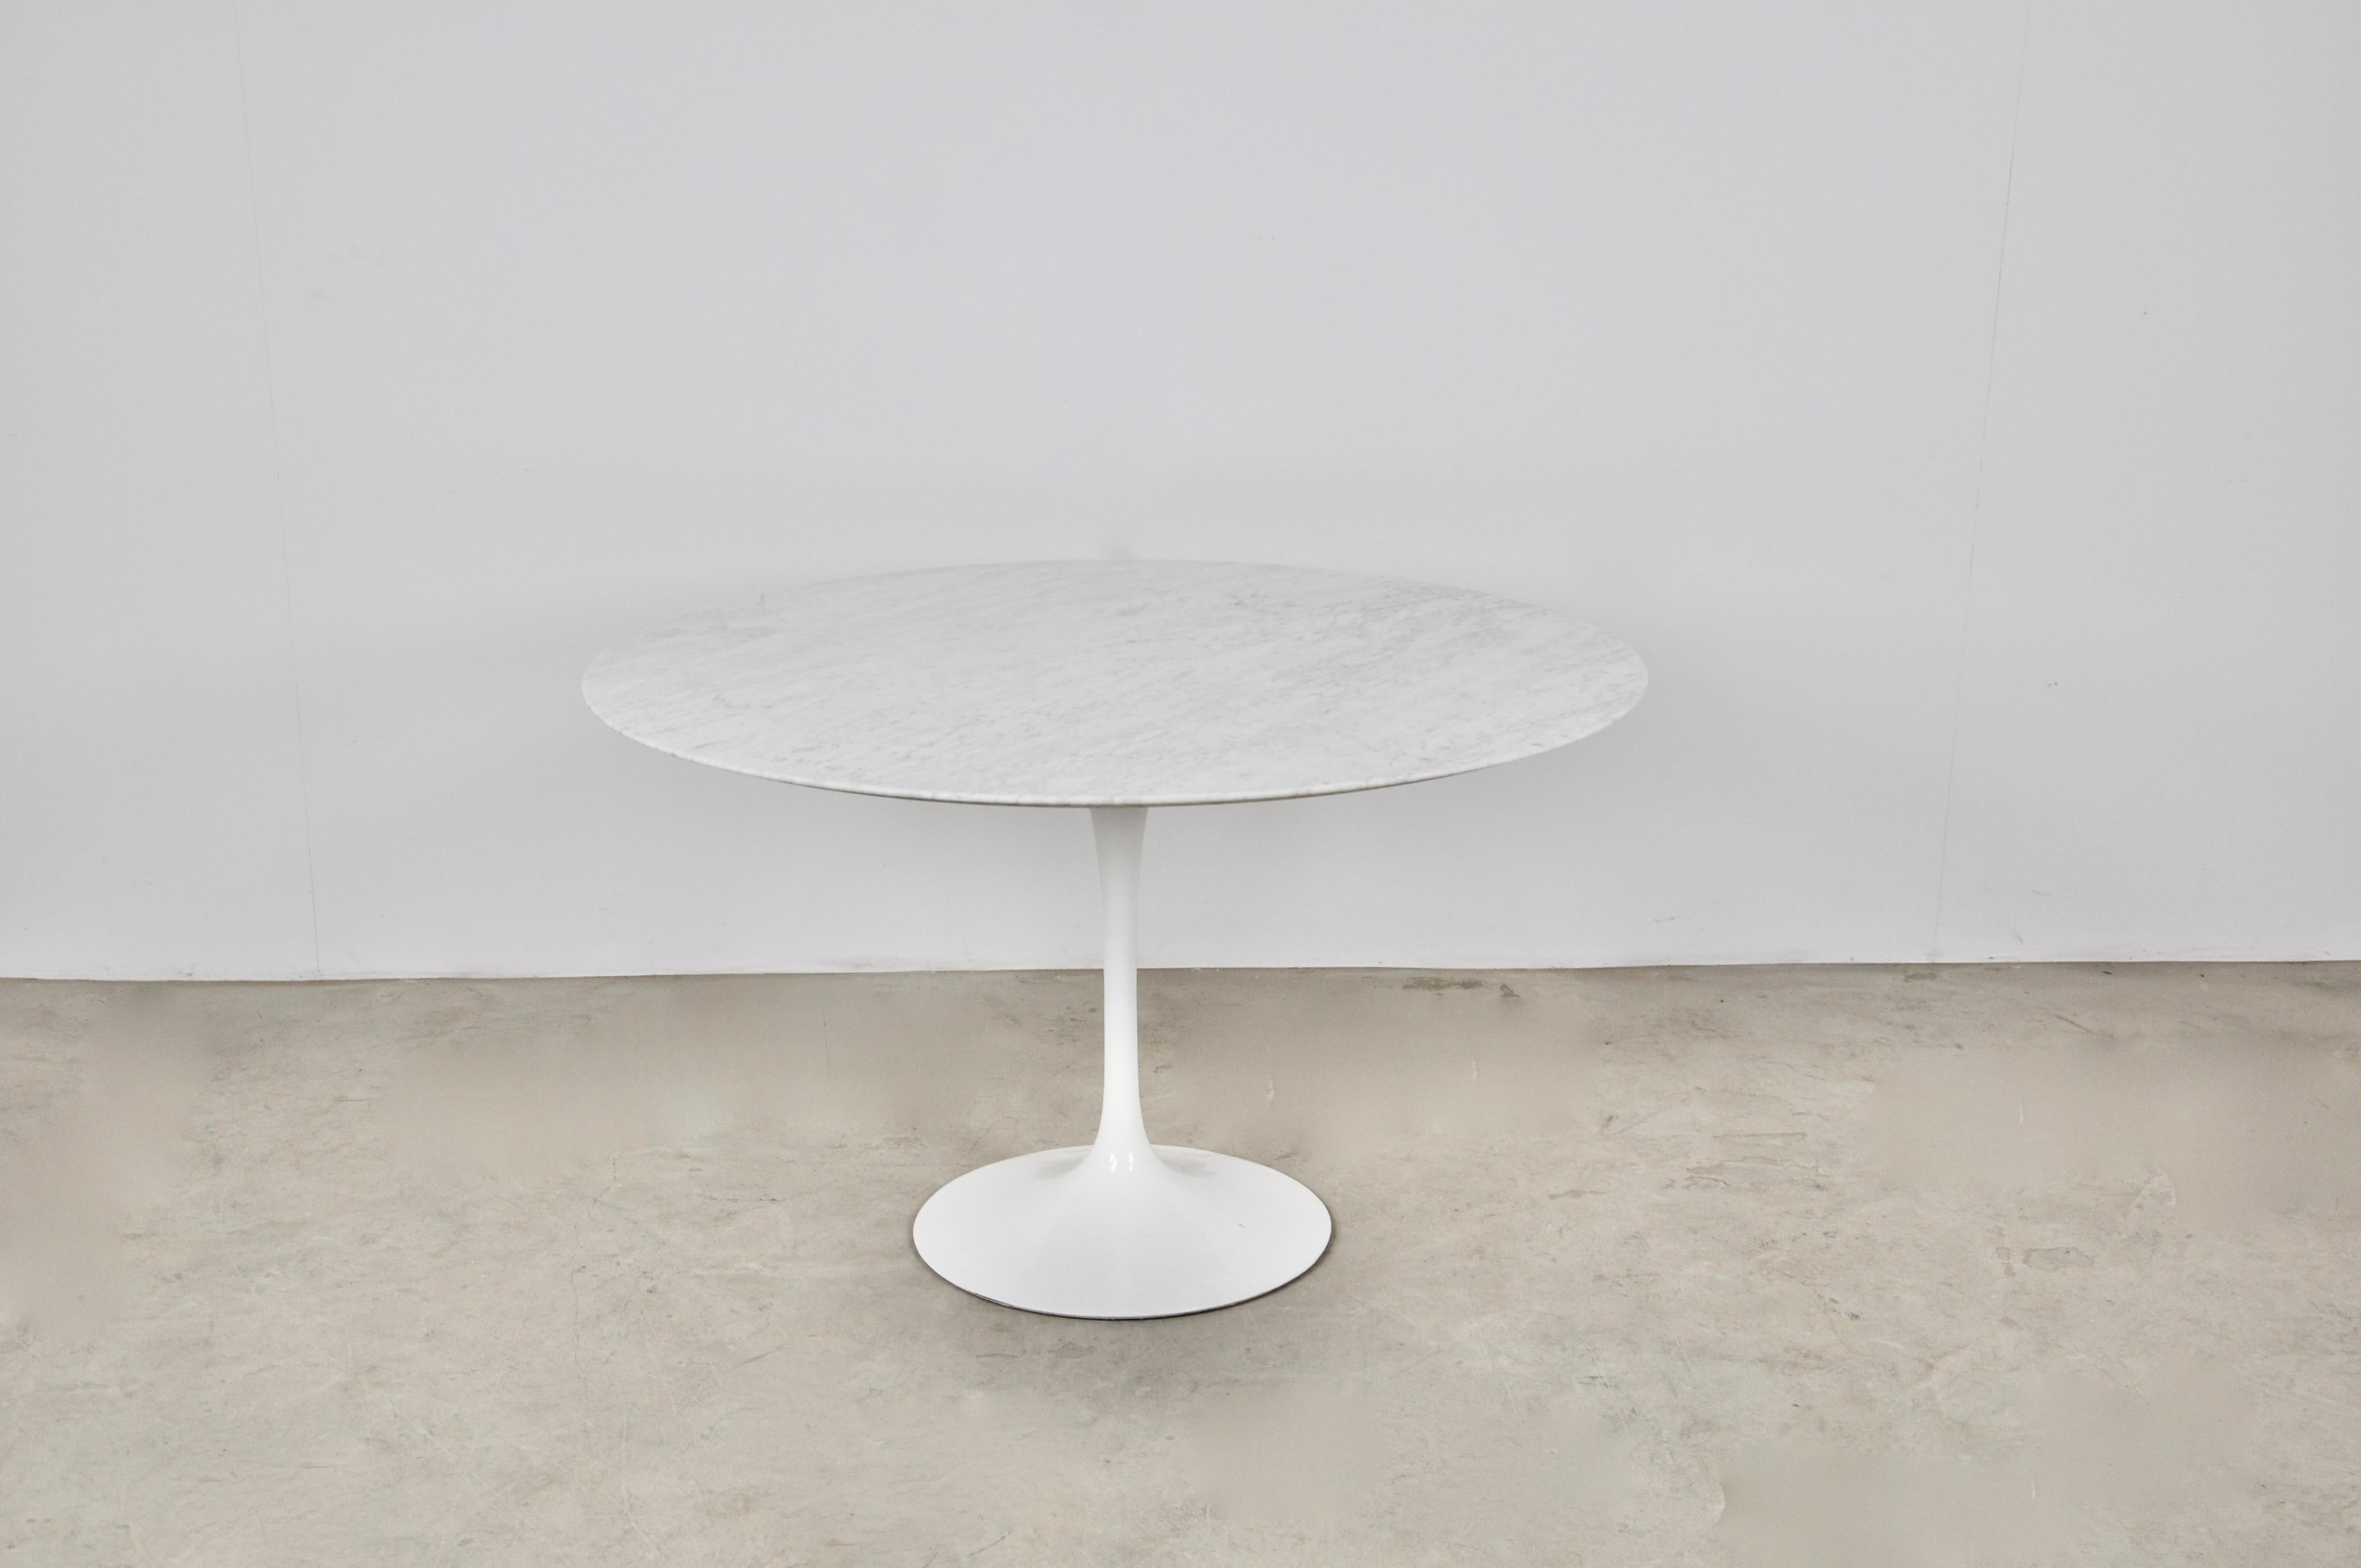 Carrara marble table with white aluminum legs. Stamped Knoll International. Wear due to time and age of the table (see photo)